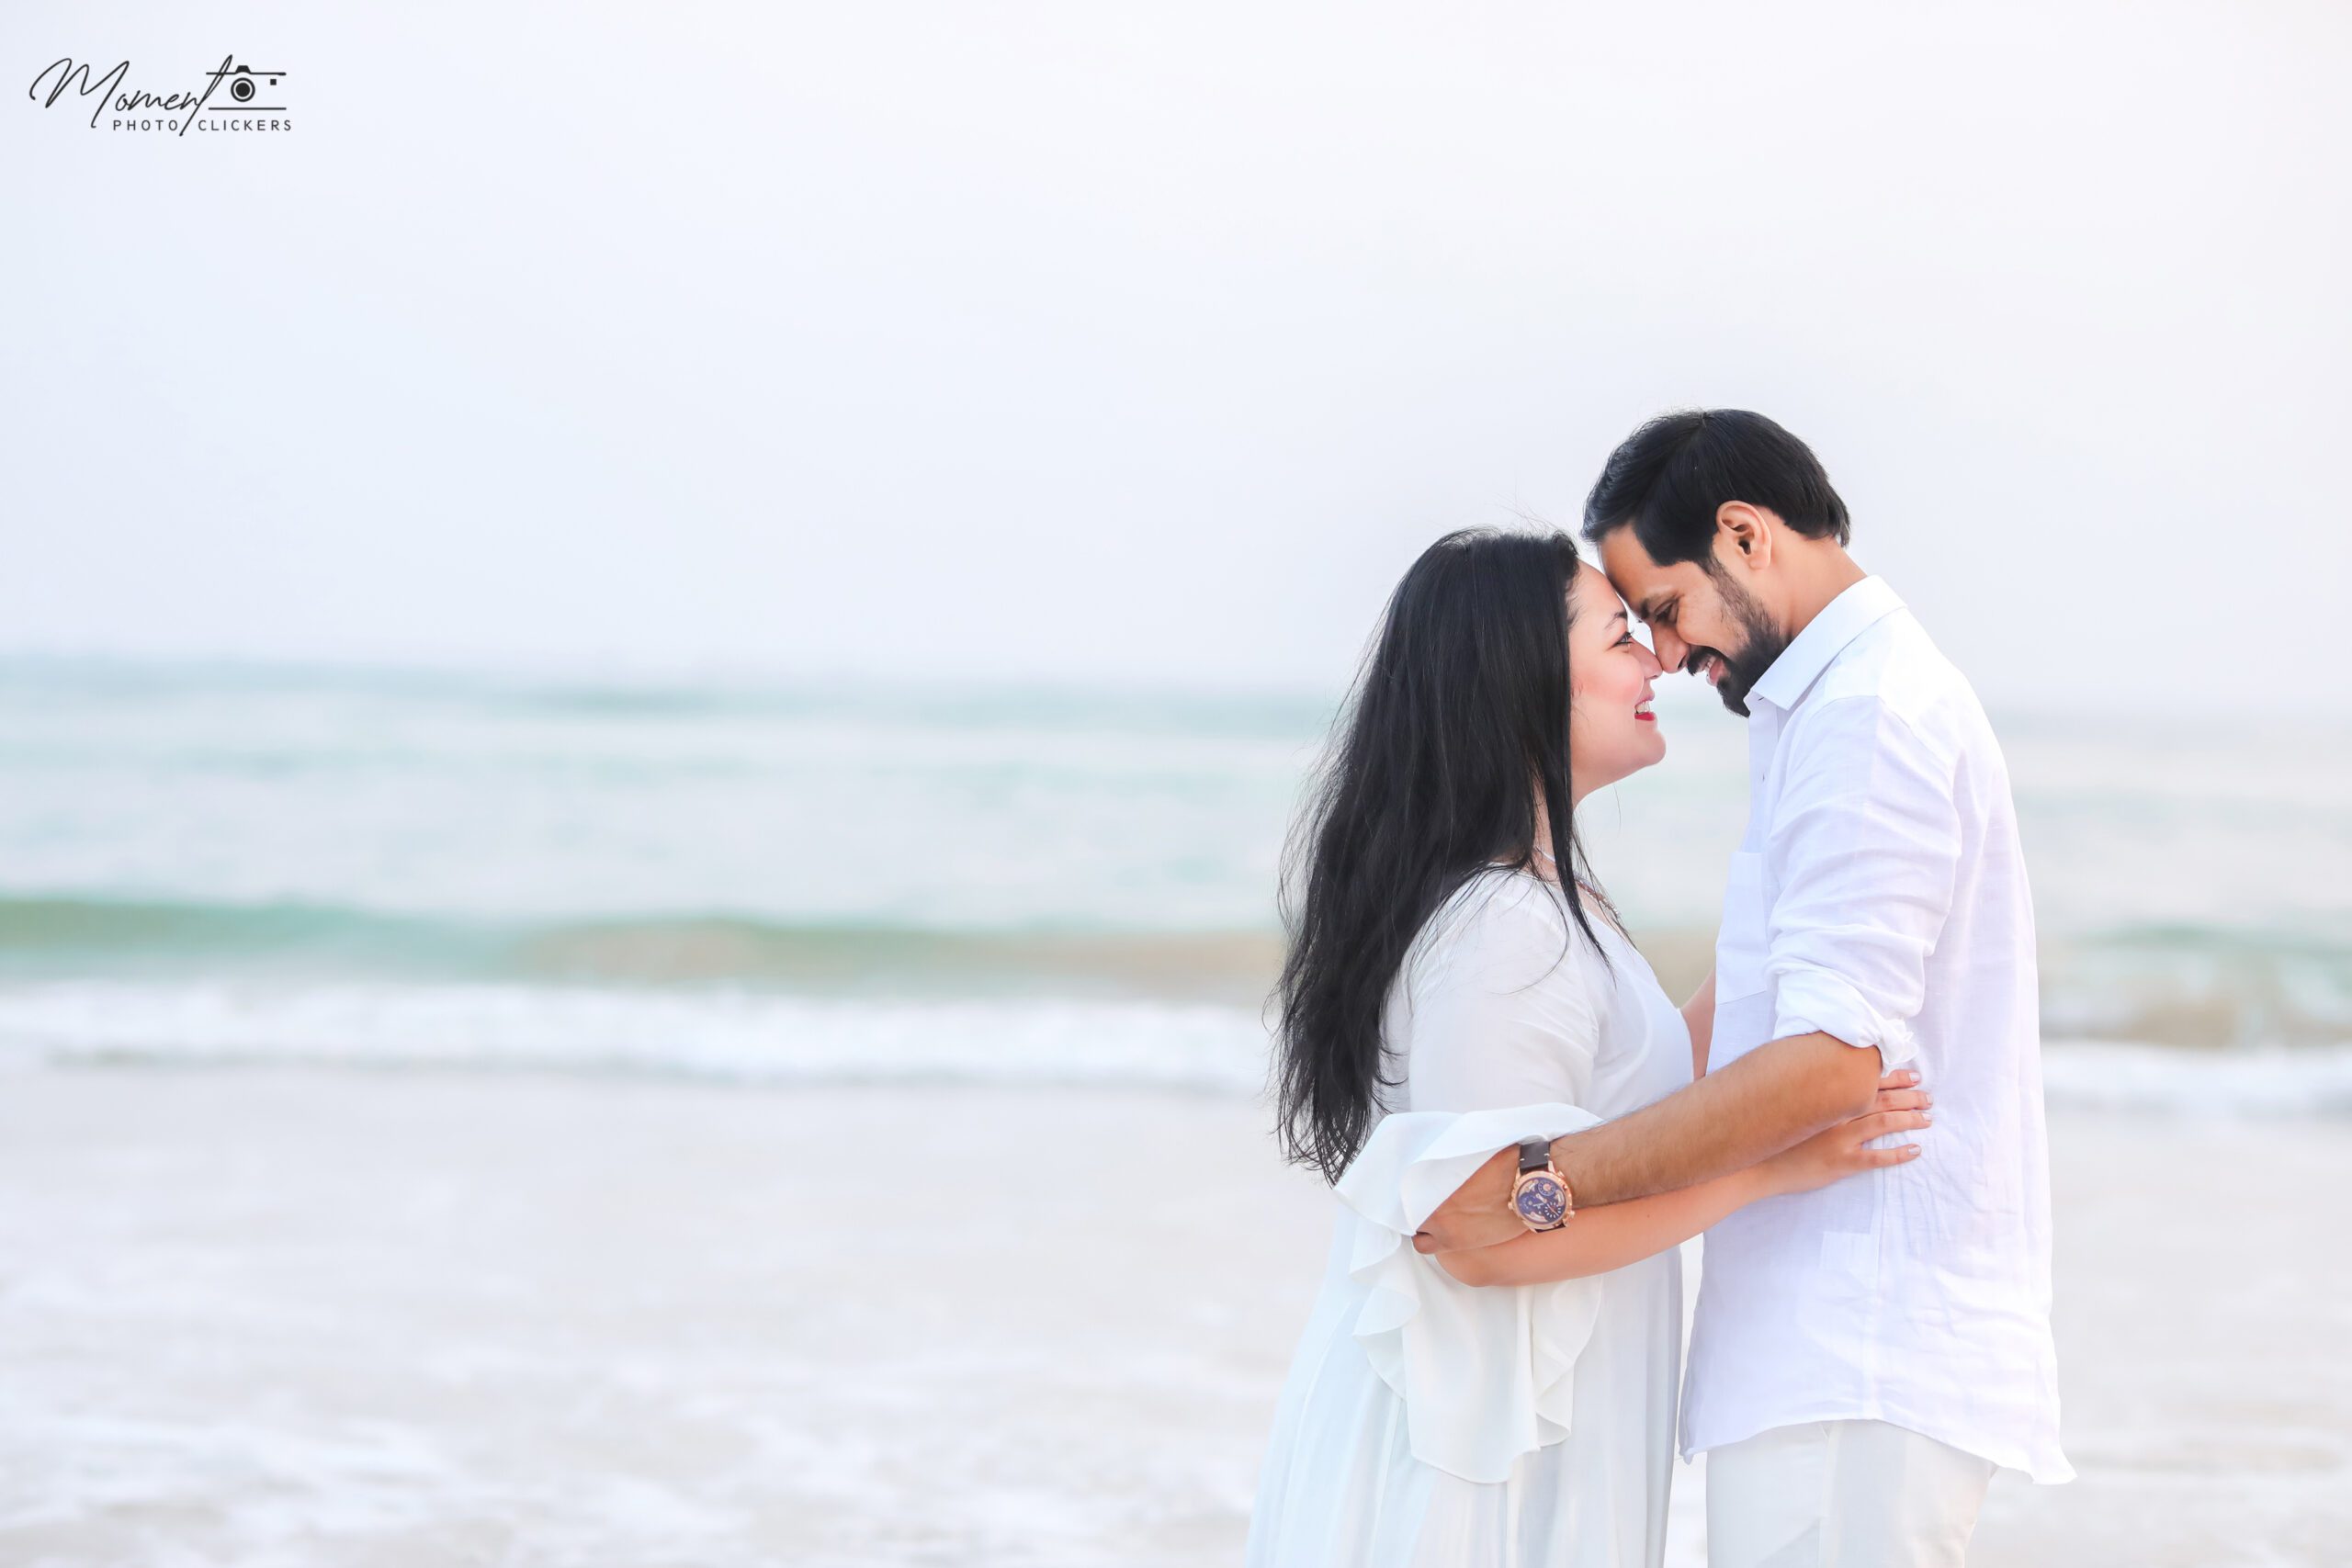 15 Simple & Best Pre-Wedding Photography Poses for Couples | MakeupWale